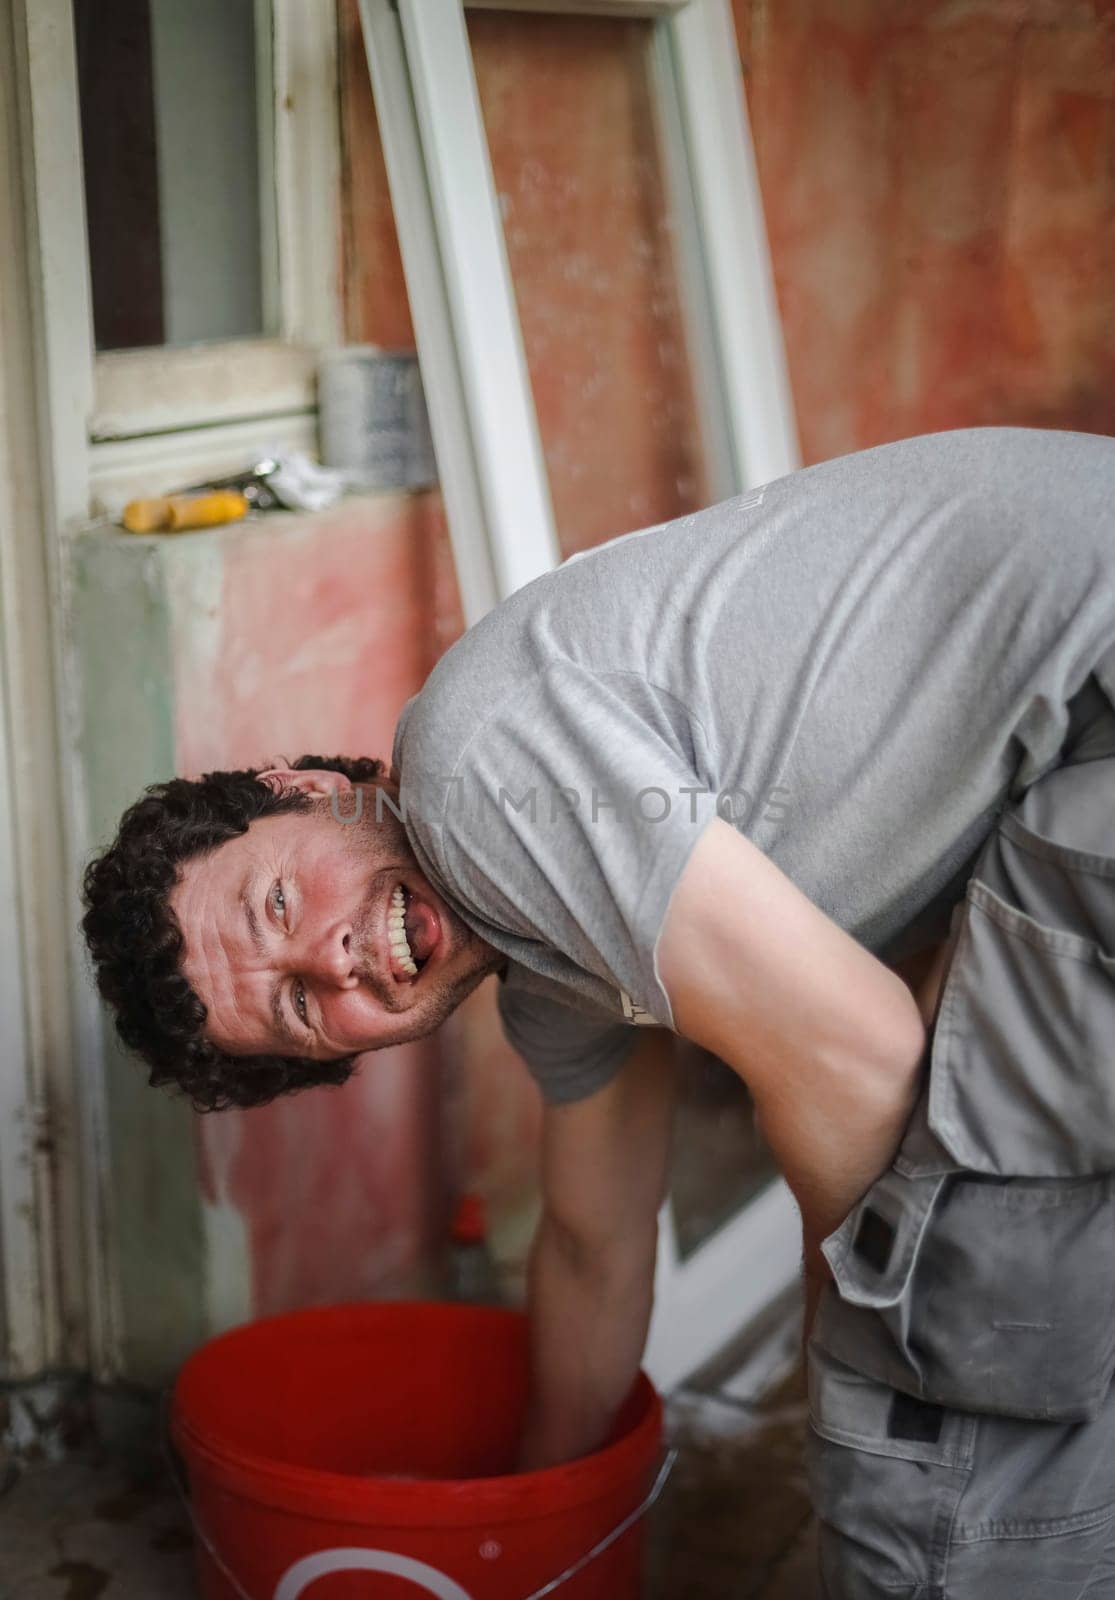 Handsome caucasian young brunette male with curly hair smiling showing tongue standing at an angle with his hand in a red bucket of water against the background of a window frame and a red wall, close-up side view with selective focus. The concept of home renovation, washing window frames.